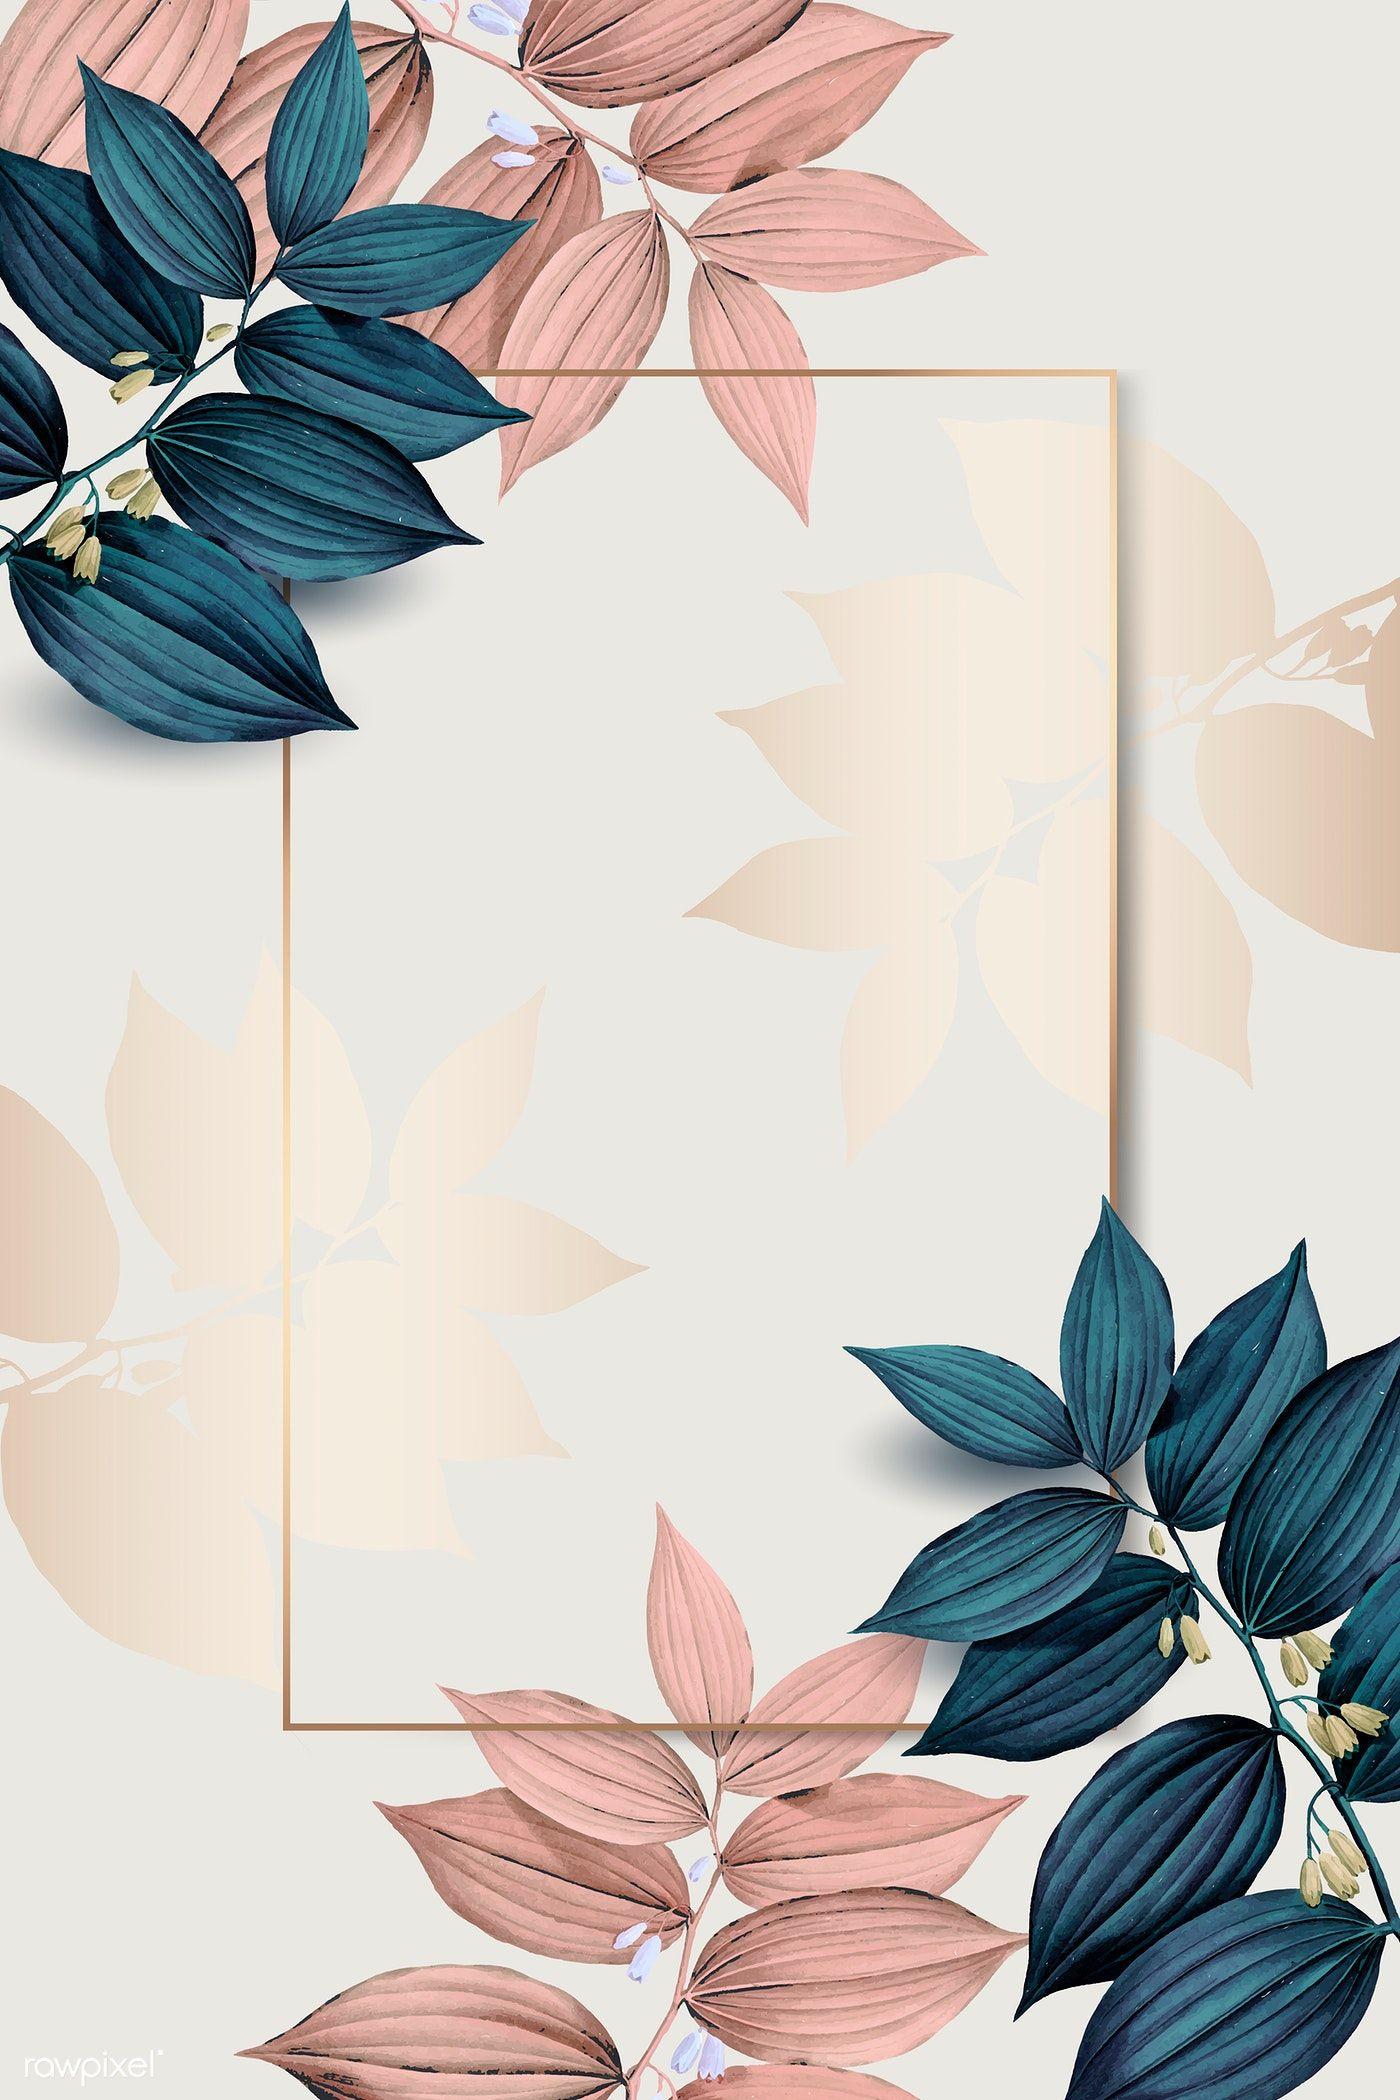 Download premium vector of Rectangle gold frame on pink and blue